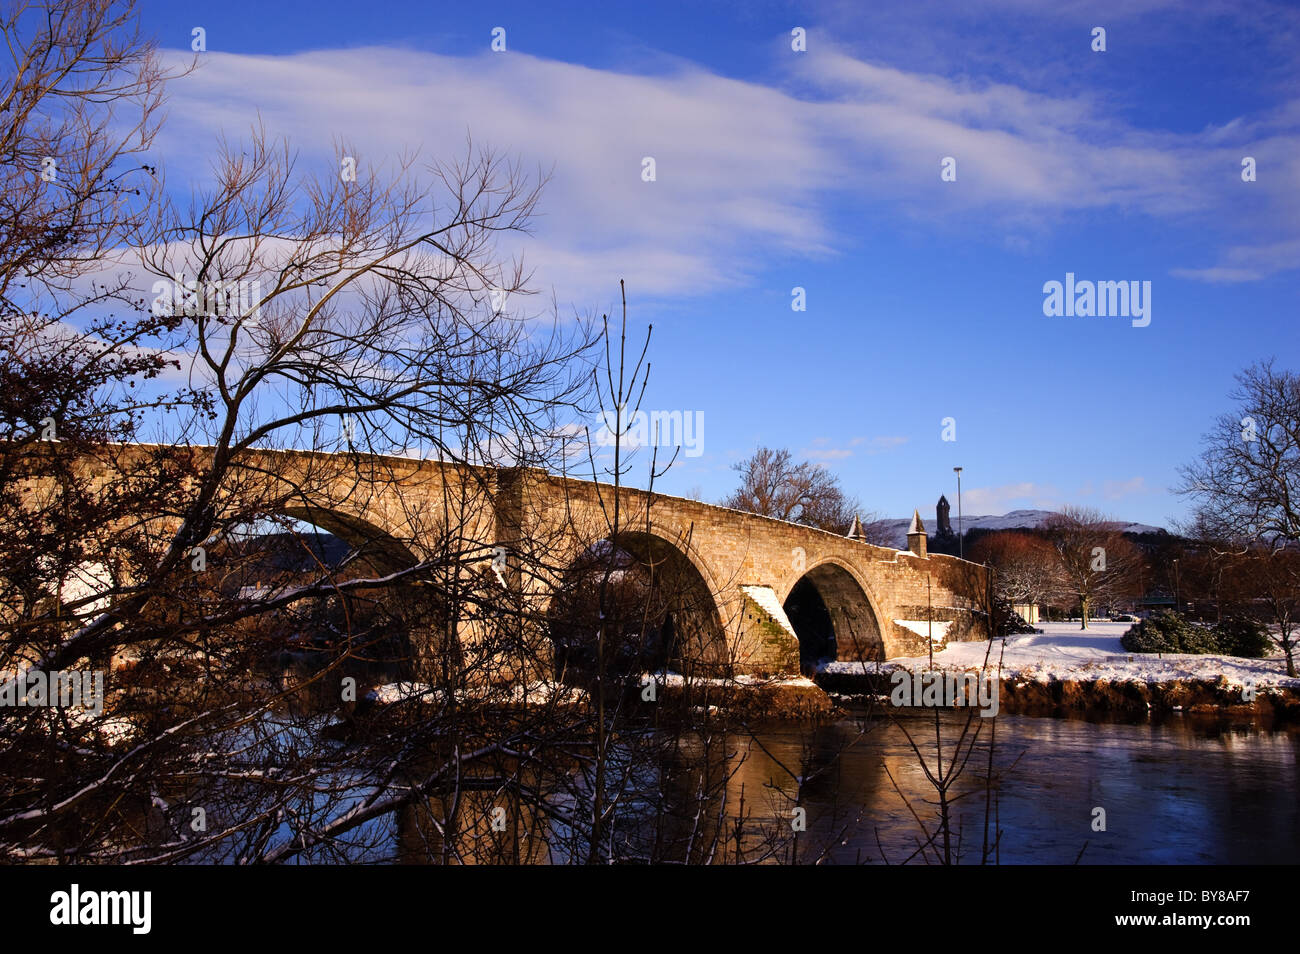 Old Stirling Bridge on the River Forth at Stirling, Scotland, UK. Stock Photo